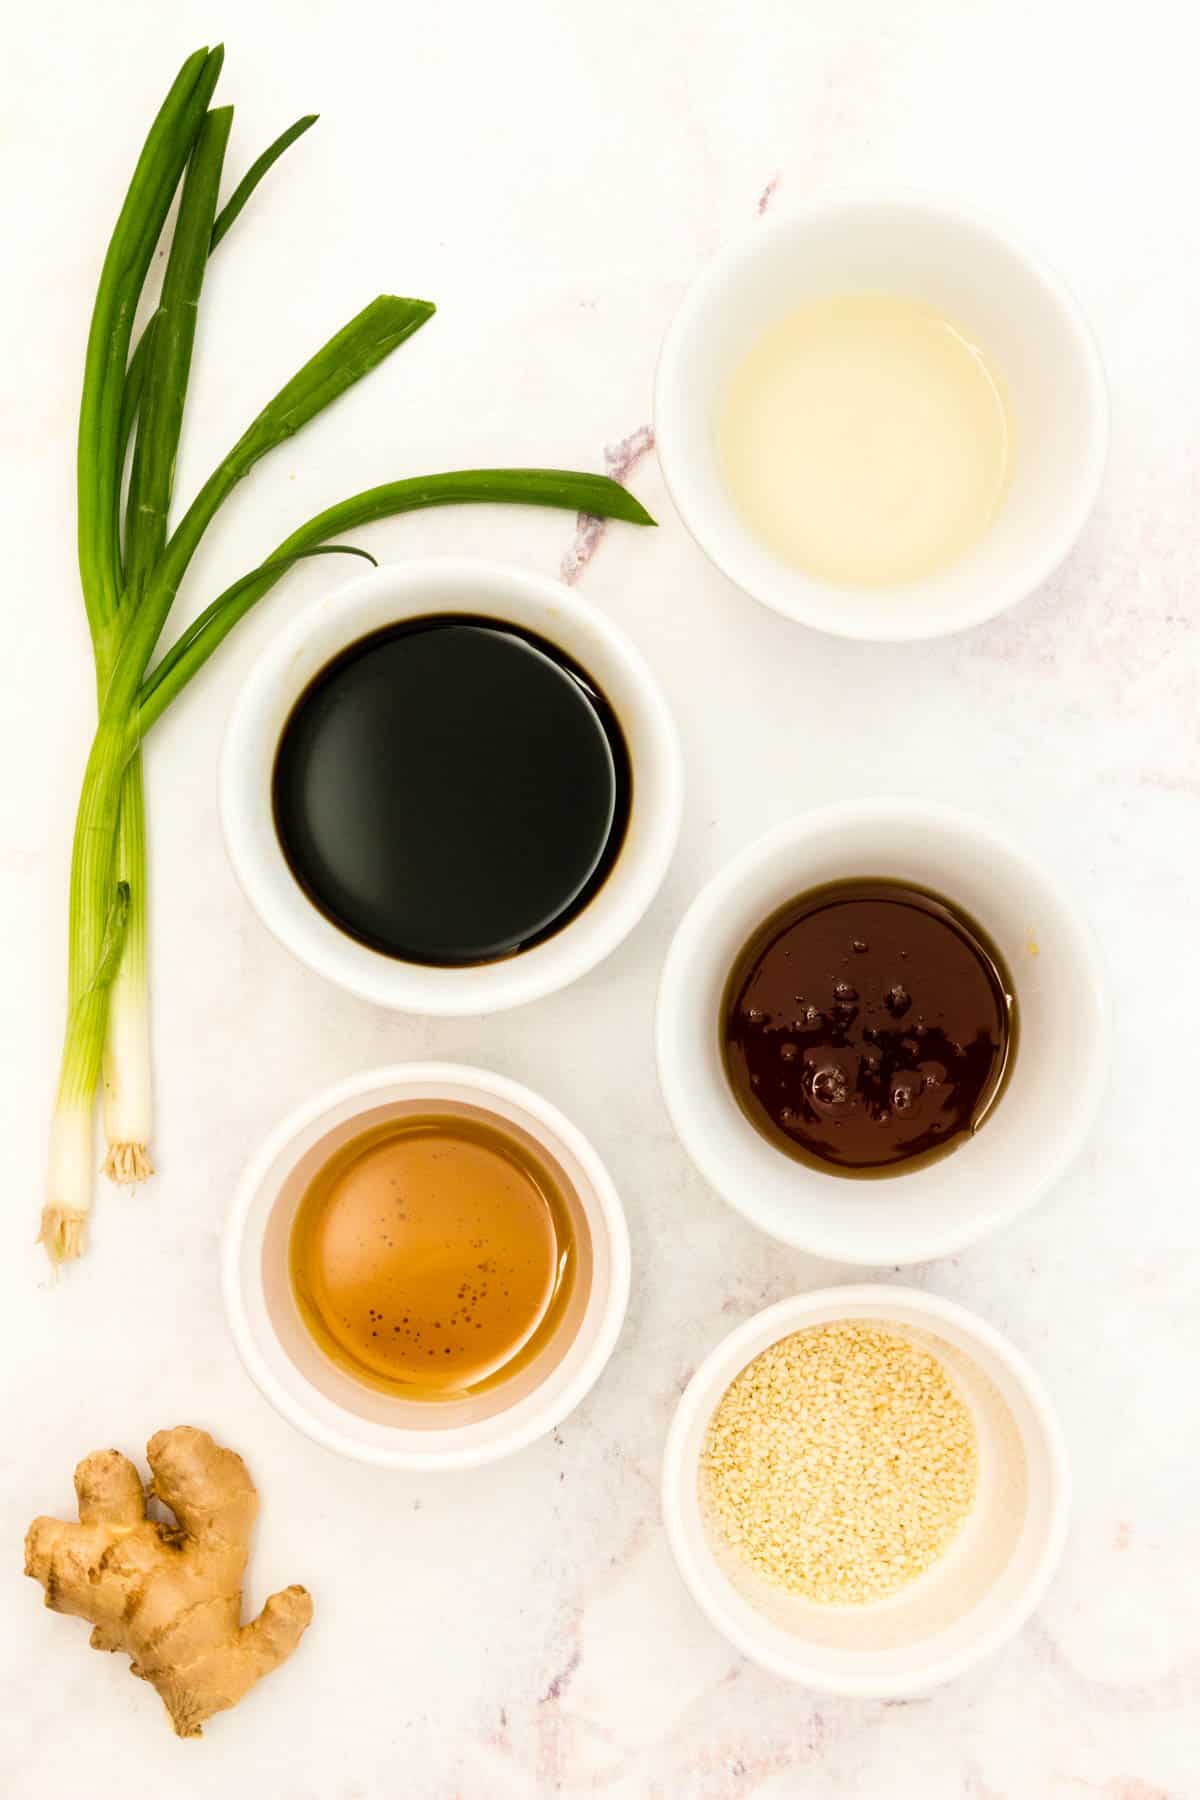 Ingredients to make a sesame and soy sauce glaze in bowls on a marble countertop.